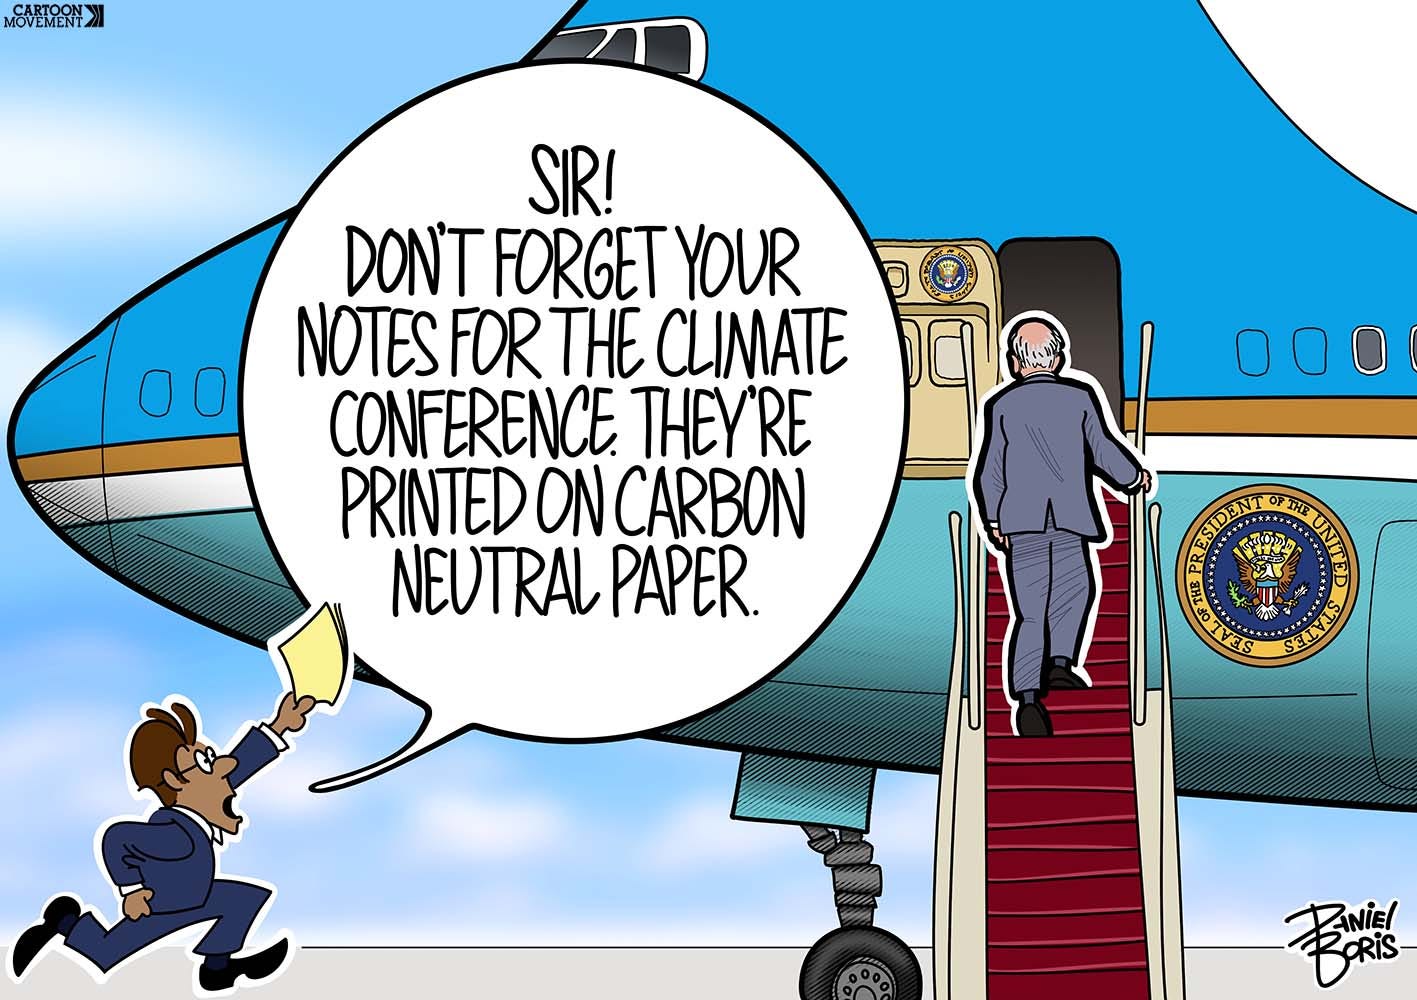 A U.S. President seen ascending steps into Air Force One jet plane. A staff person is seen running towards the plane holding yellow papers above them in their hand. Staff person's dialogue: "SIR! DON’T FORGET YOUR NOTES FOR THE CLIMATE CONFERENCE. THEY’RE PRINTED ON CARBON NEUTRAL PAPER."